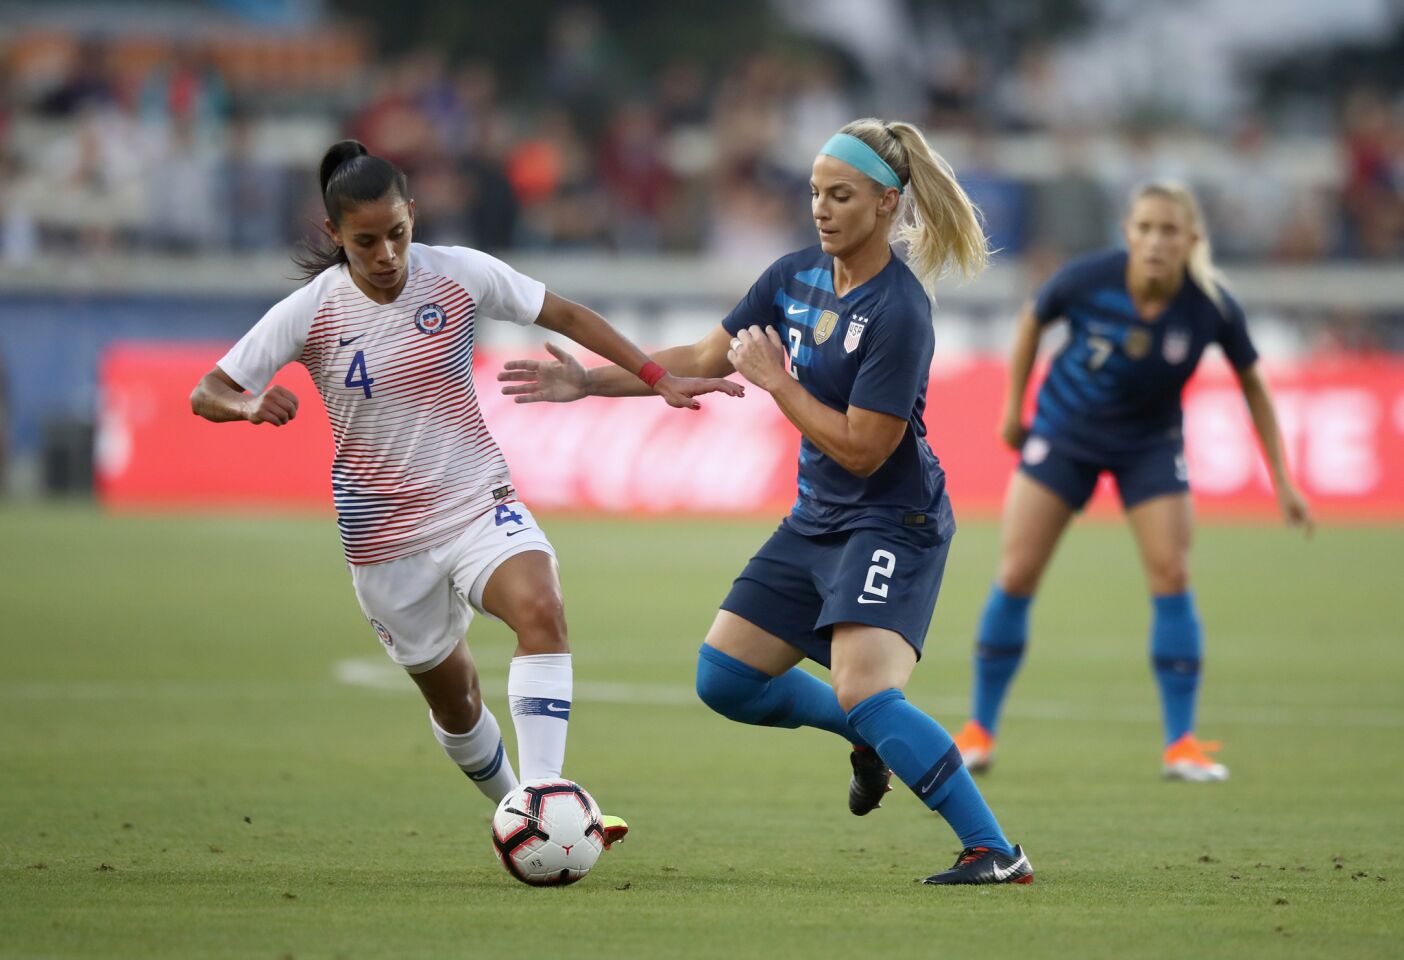 SAN JOSE, CA - SEPTEMBER 04: Julie Ertz of the United States plays defense on Francisca Lara of Chili during their match at Avaya Stadium on September 4, 2018 in San Jose, California. (Photo by Ezra Shaw/Getty Images) ** OUTS - ELSENT, FPG, CM - OUTS * NM, PH, VA if sourced by CT, LA or MoD **